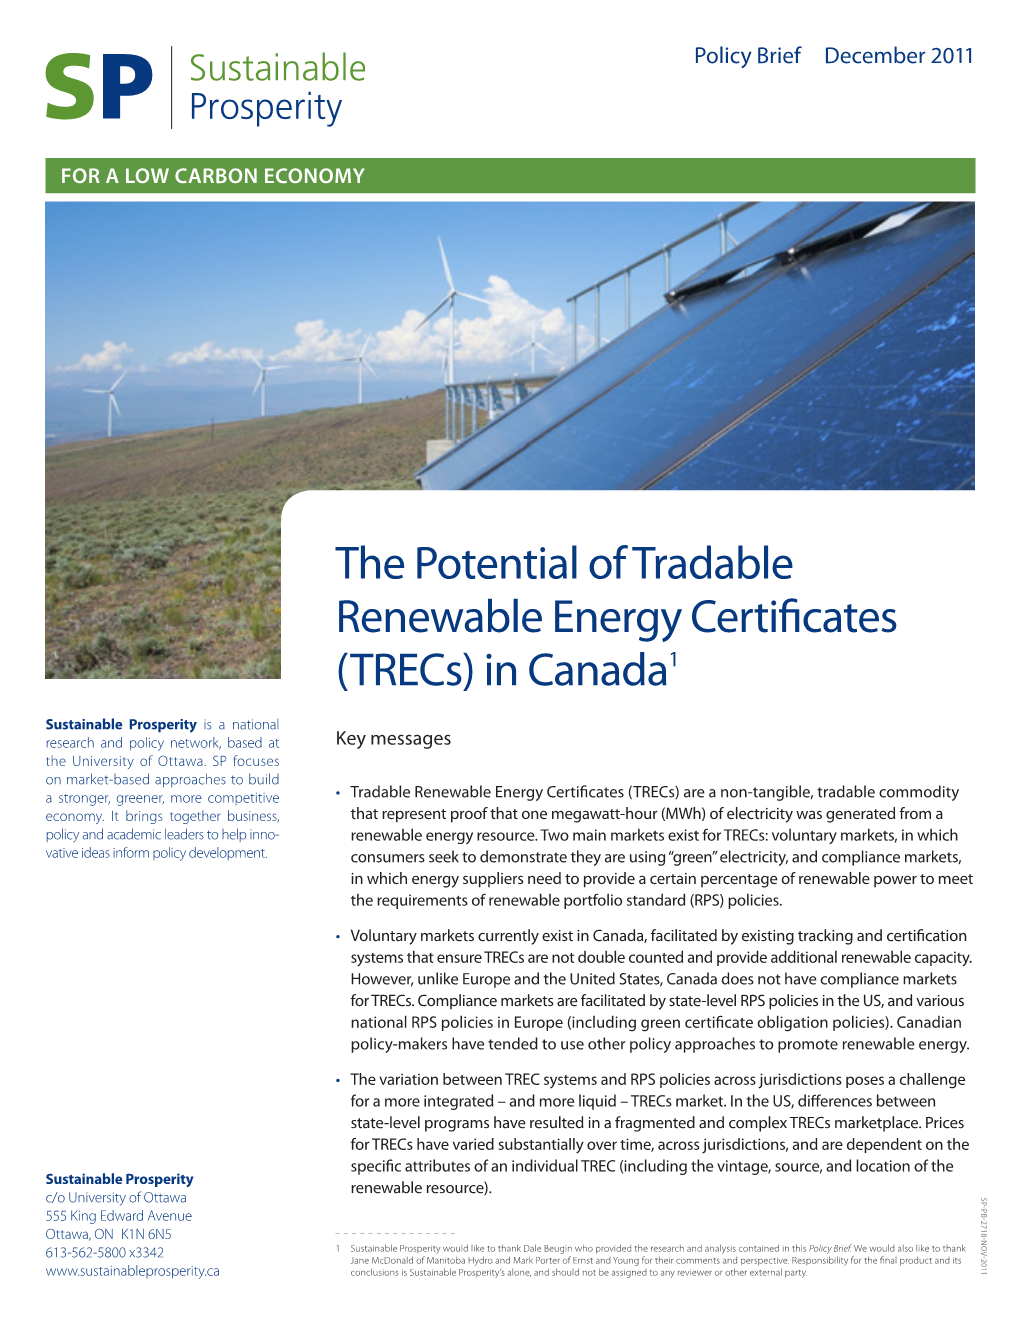 The Potential of Tradable Renewable Energy Certificates (Trecs) in Canada1